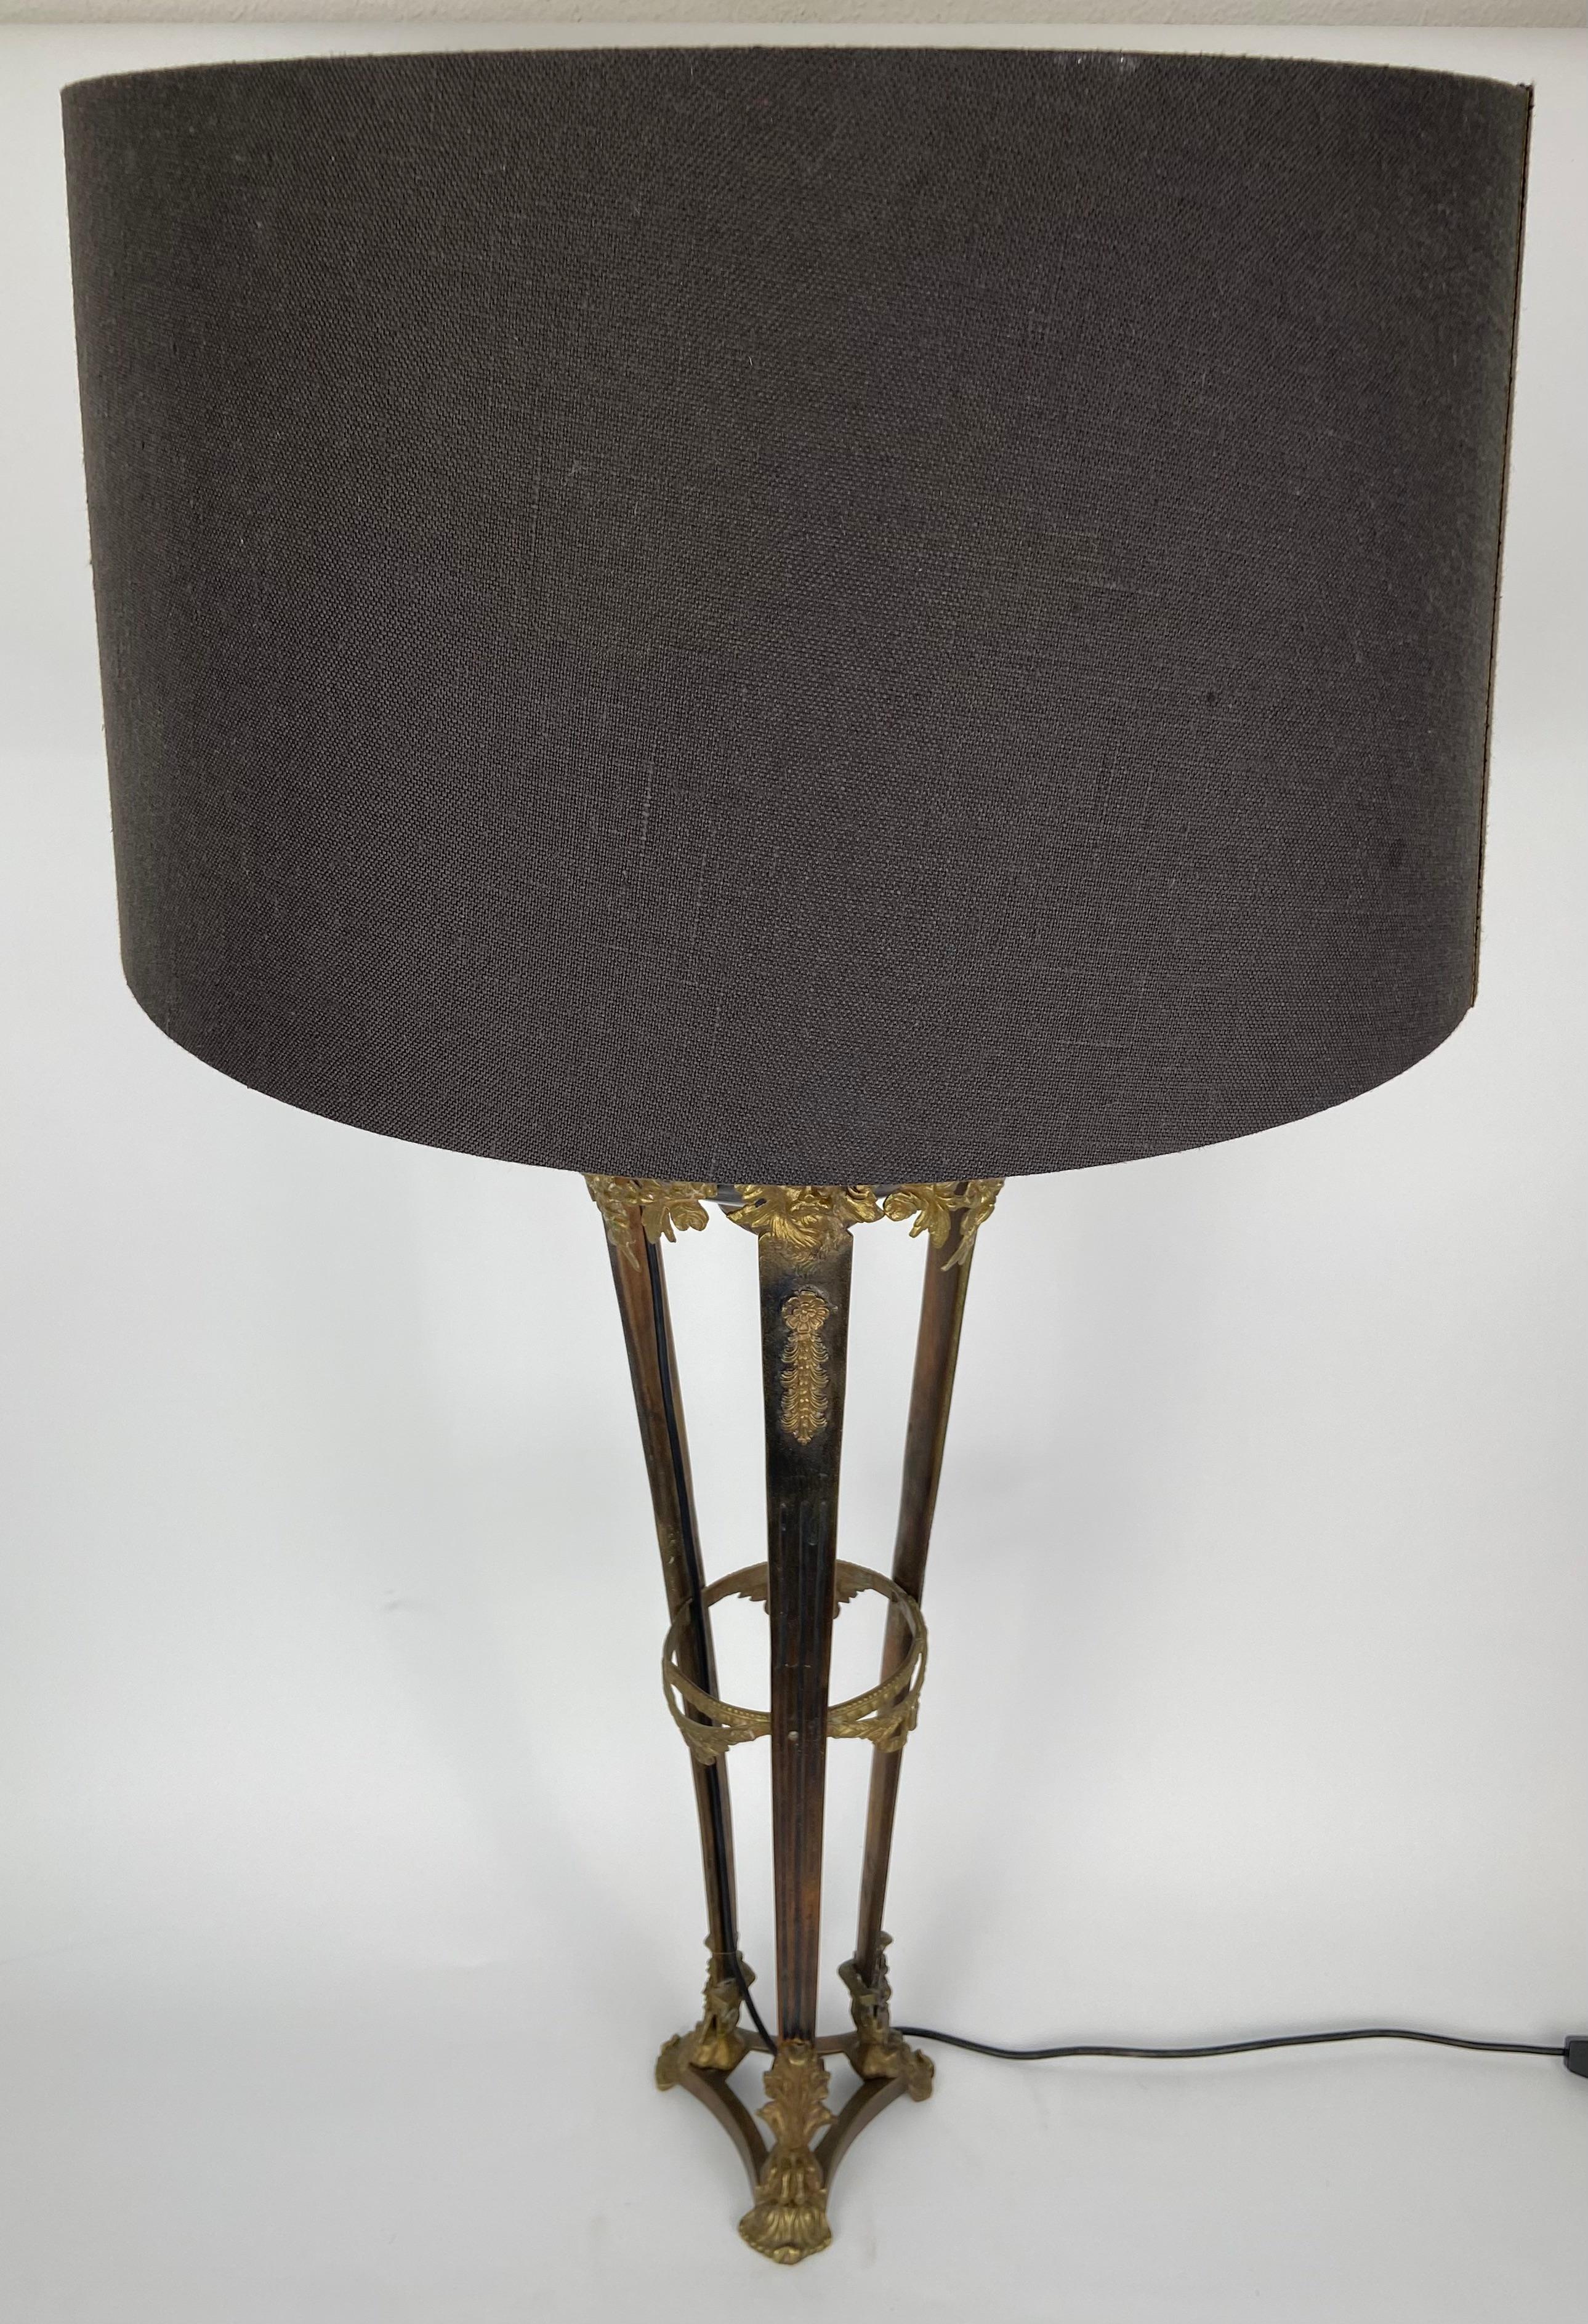 Tall Italian table lamp in bronze, decorated with masks and guirlandes.
Grey shade in linen with a gold interior.
 